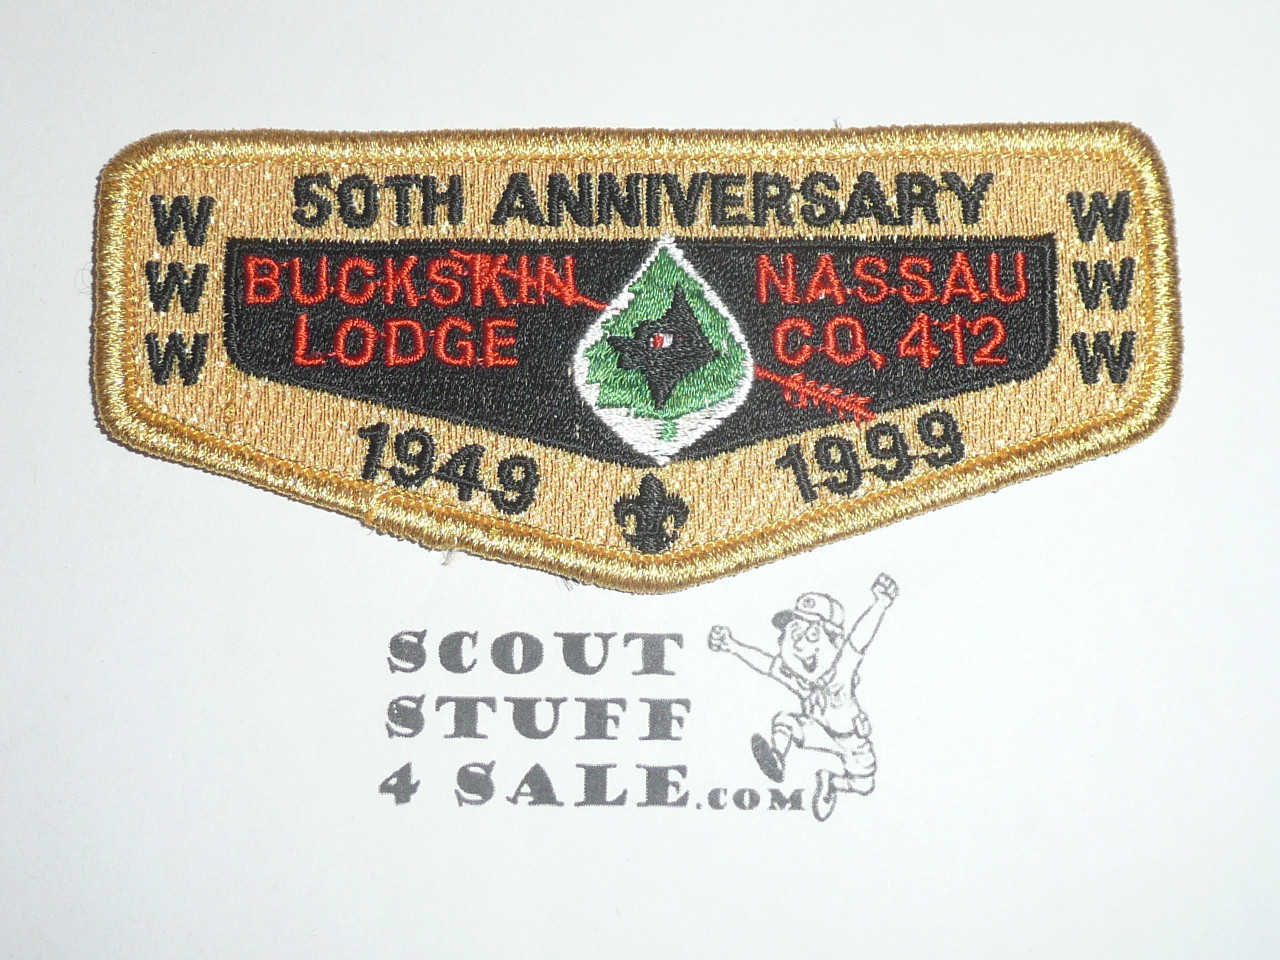 Order of the Arrow Lodge #412 Buckskin s23 50th Anniversary Flap Patch